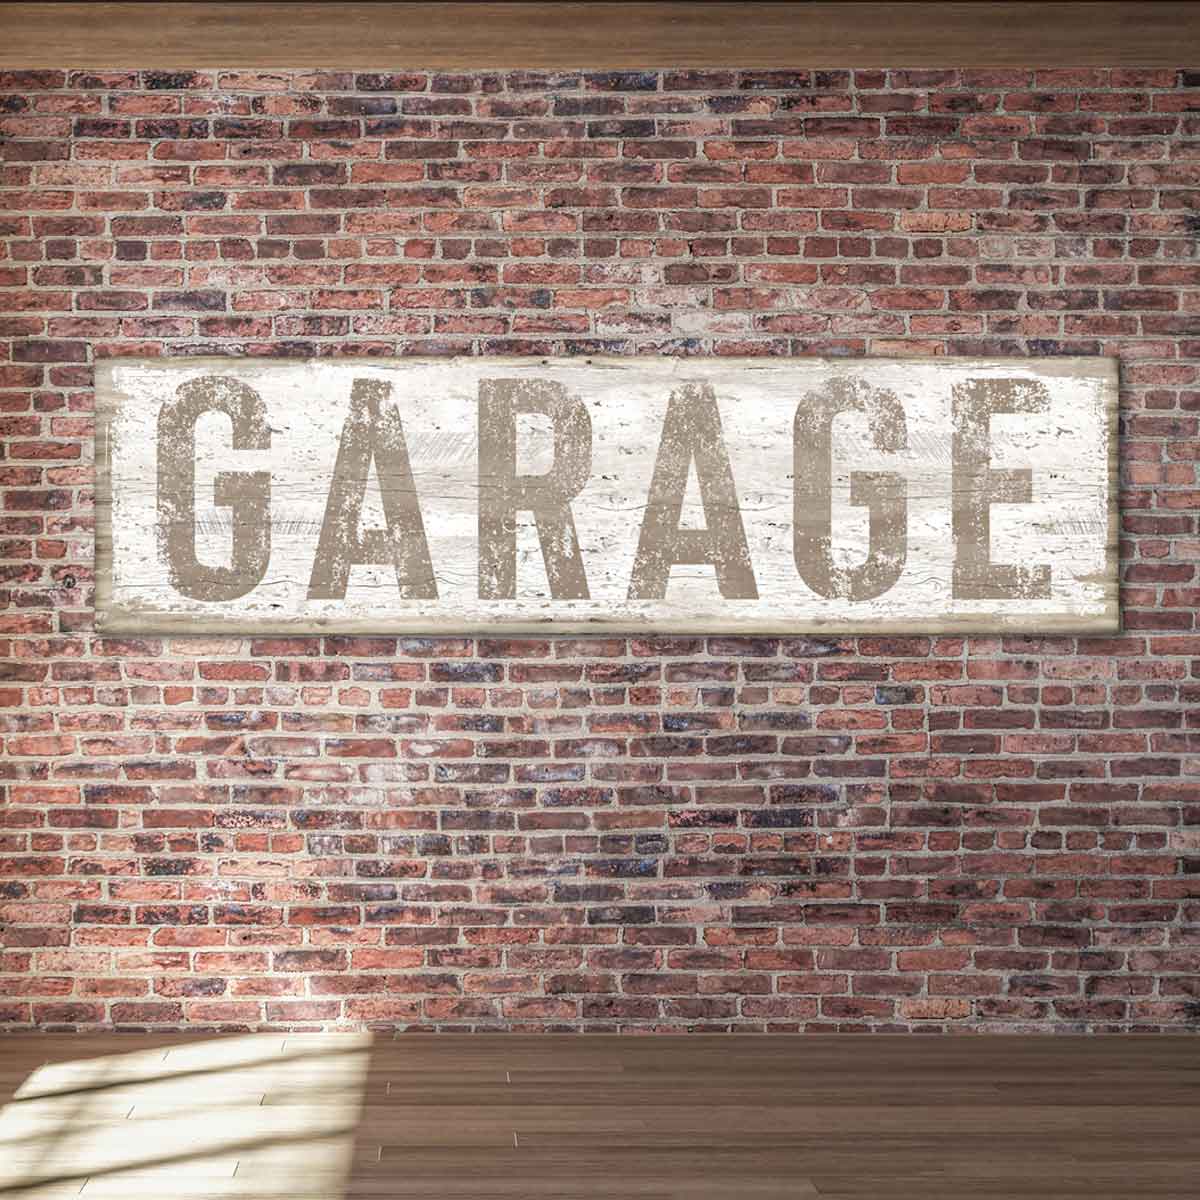 Reads Garage in light brown on canvas or metal with a background that appears to be white wood